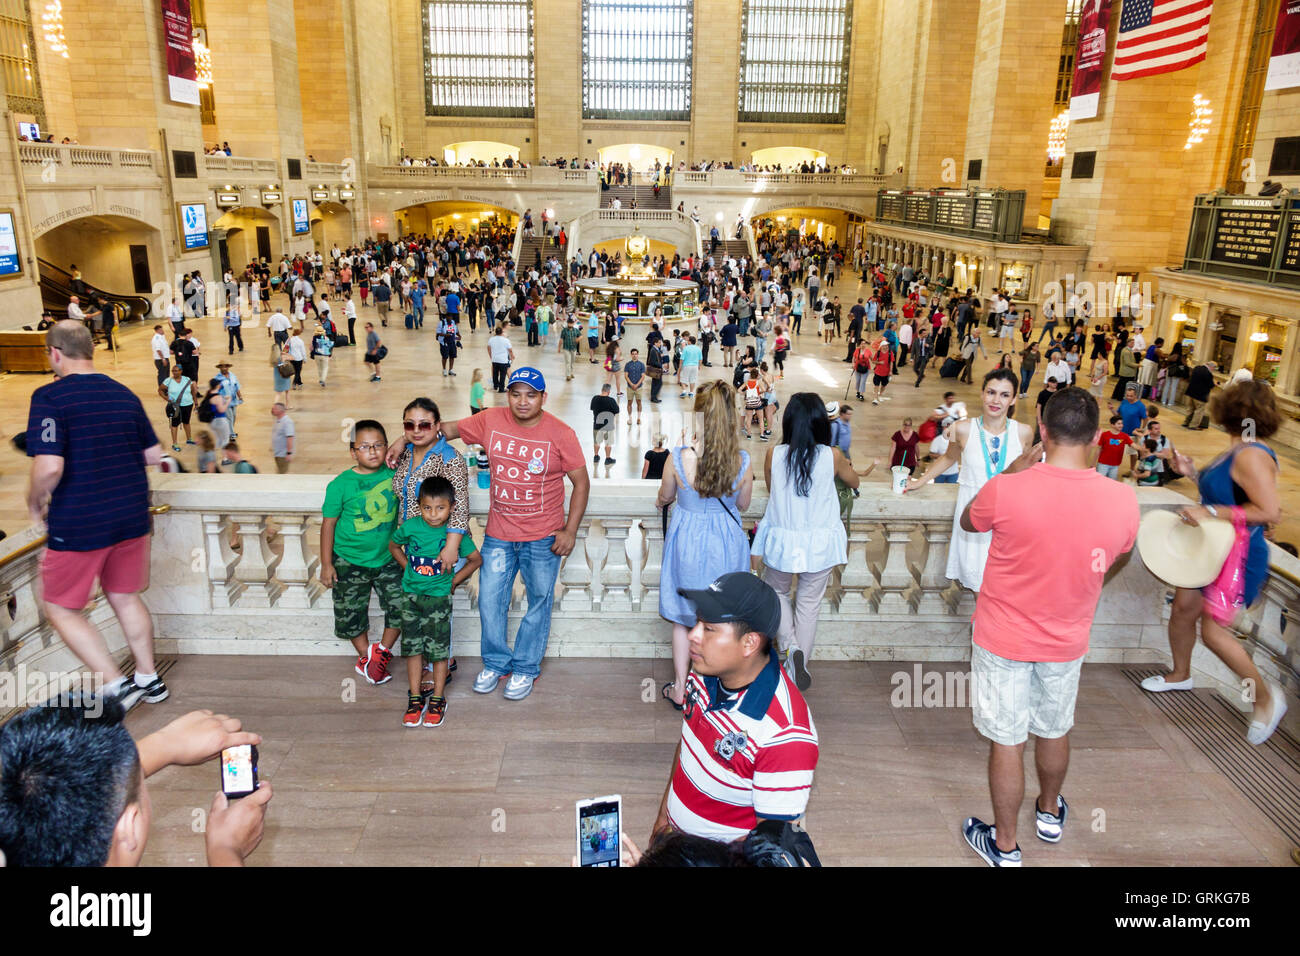 New York City,NY NYC,Manhattan,Midtown,Grand Central terminal,gare,navetteurs,passagers passagers rider riders,chemin de fer,main,foule,hispanique Latin L. Banque D'Images